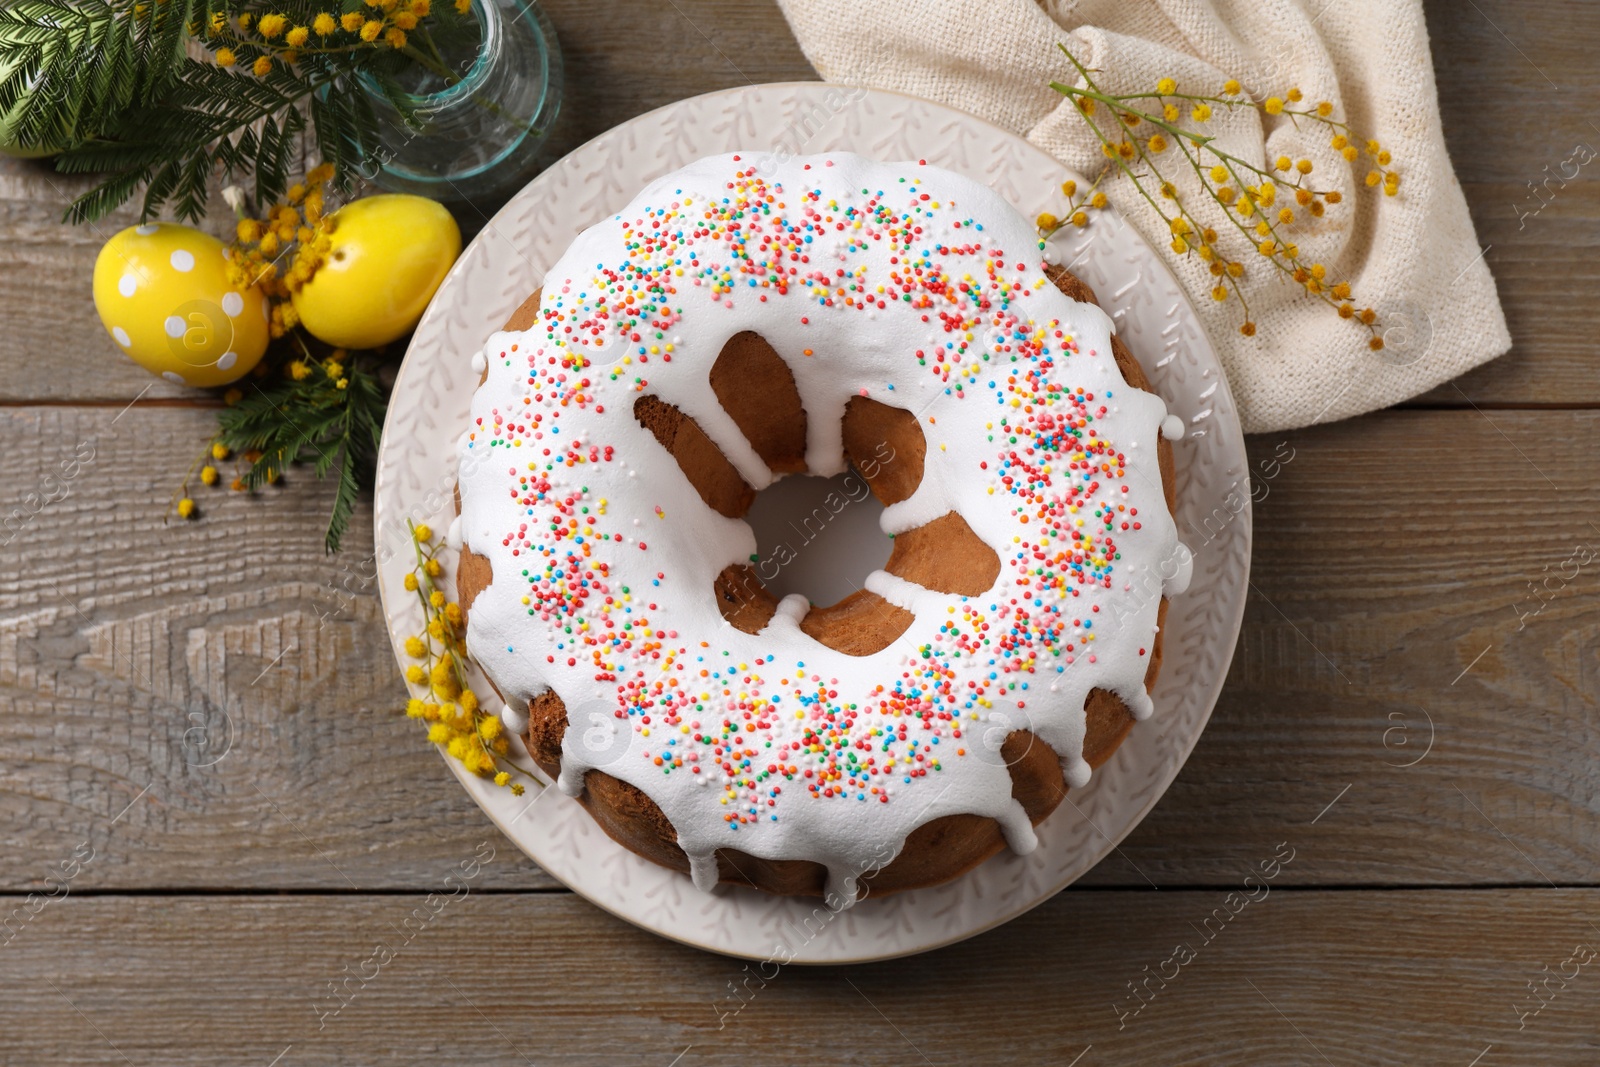 Photo of Glazed Easter cake with sprinkles, painted eggs and flowers on wooden table, flat lay